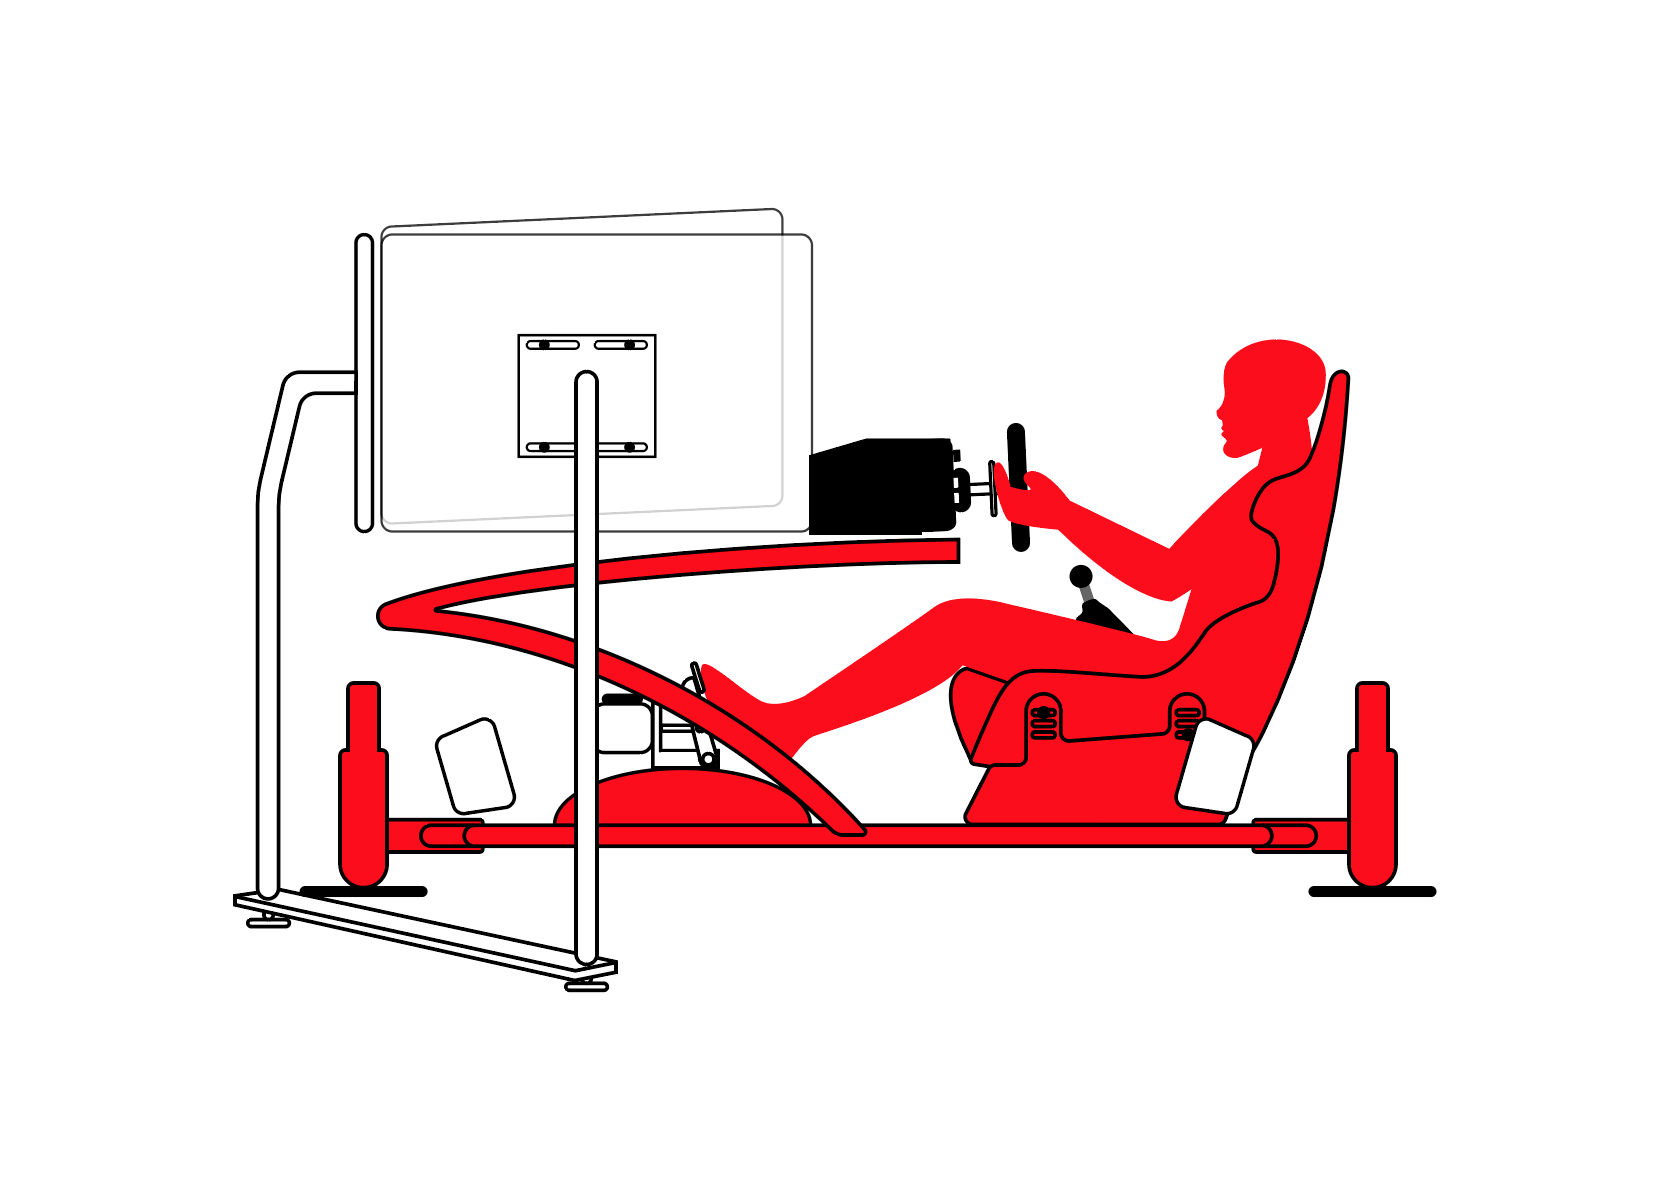 A simulator that moves the weight of the driver and platform